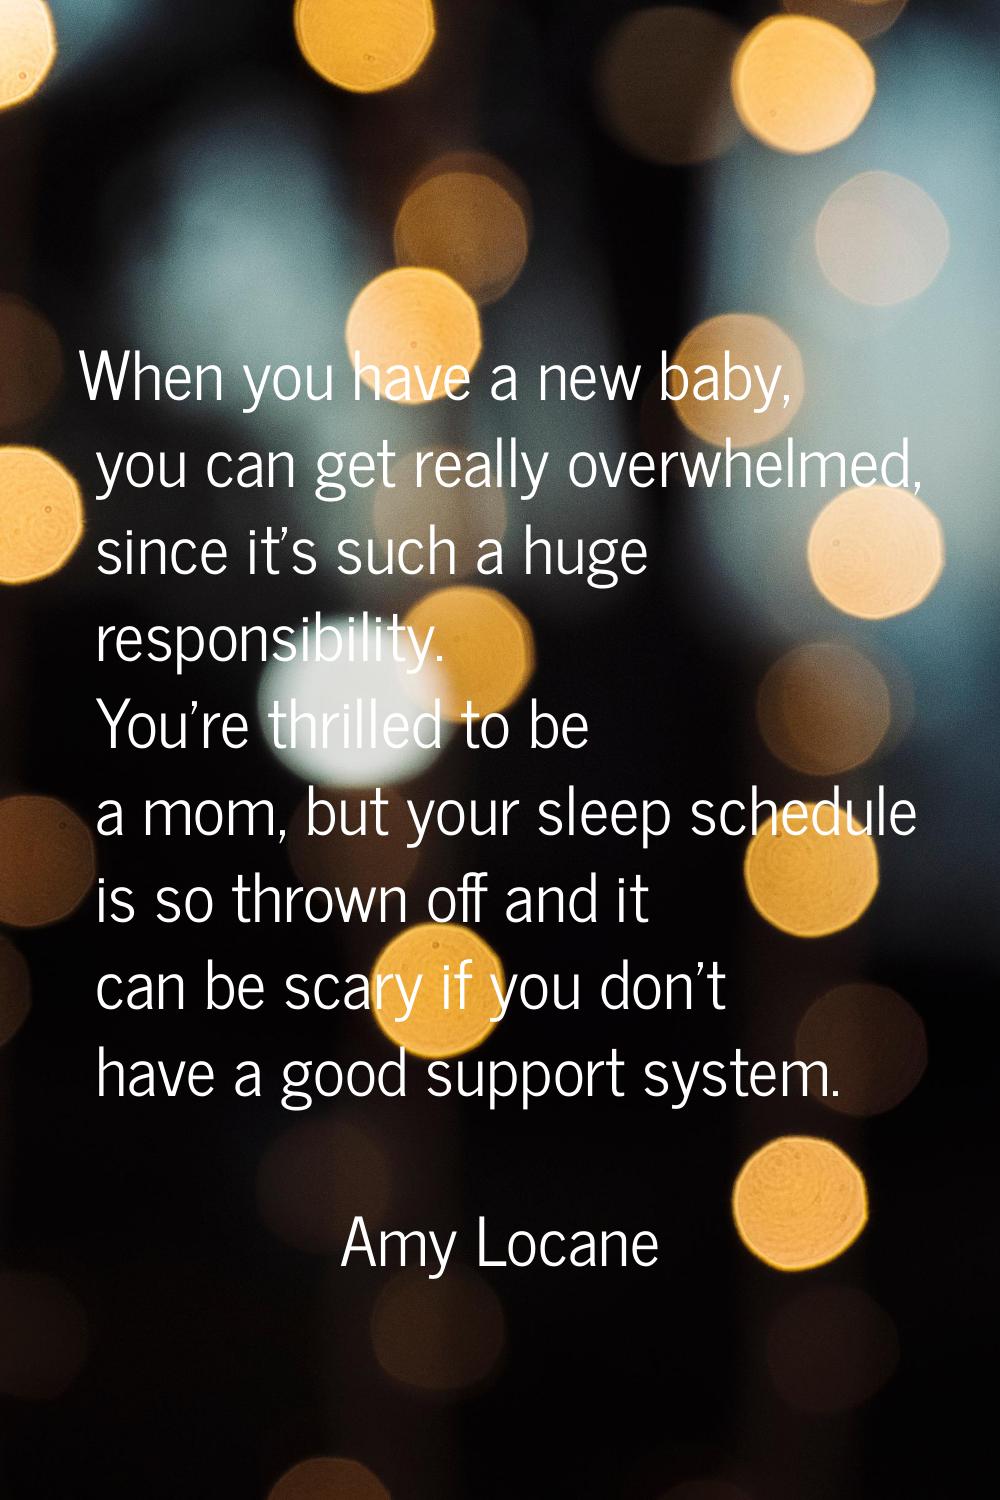 When you have a new baby, you can get really overwhelmed, since it's such a huge responsibility. Yo